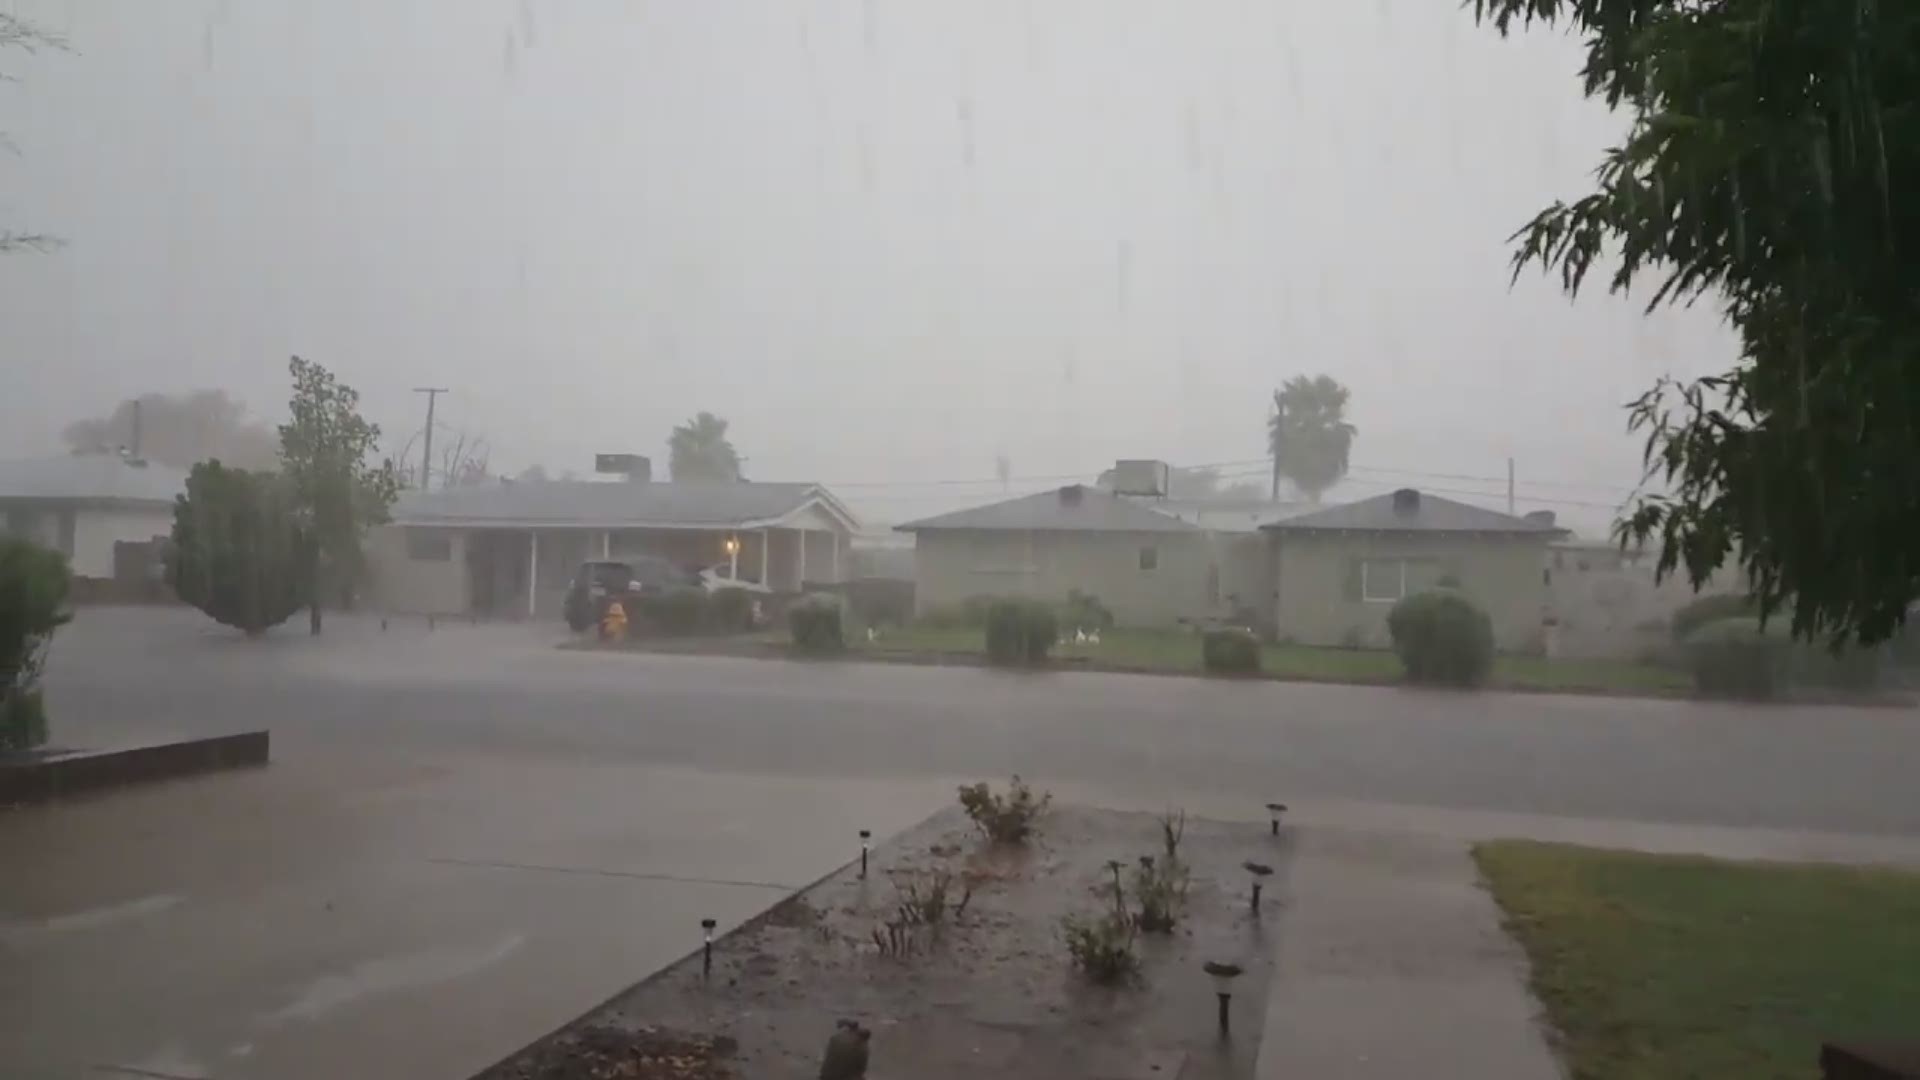 12 News viewer Colleen Rose captured heavy rain and wind near 19th Ave and Indian School